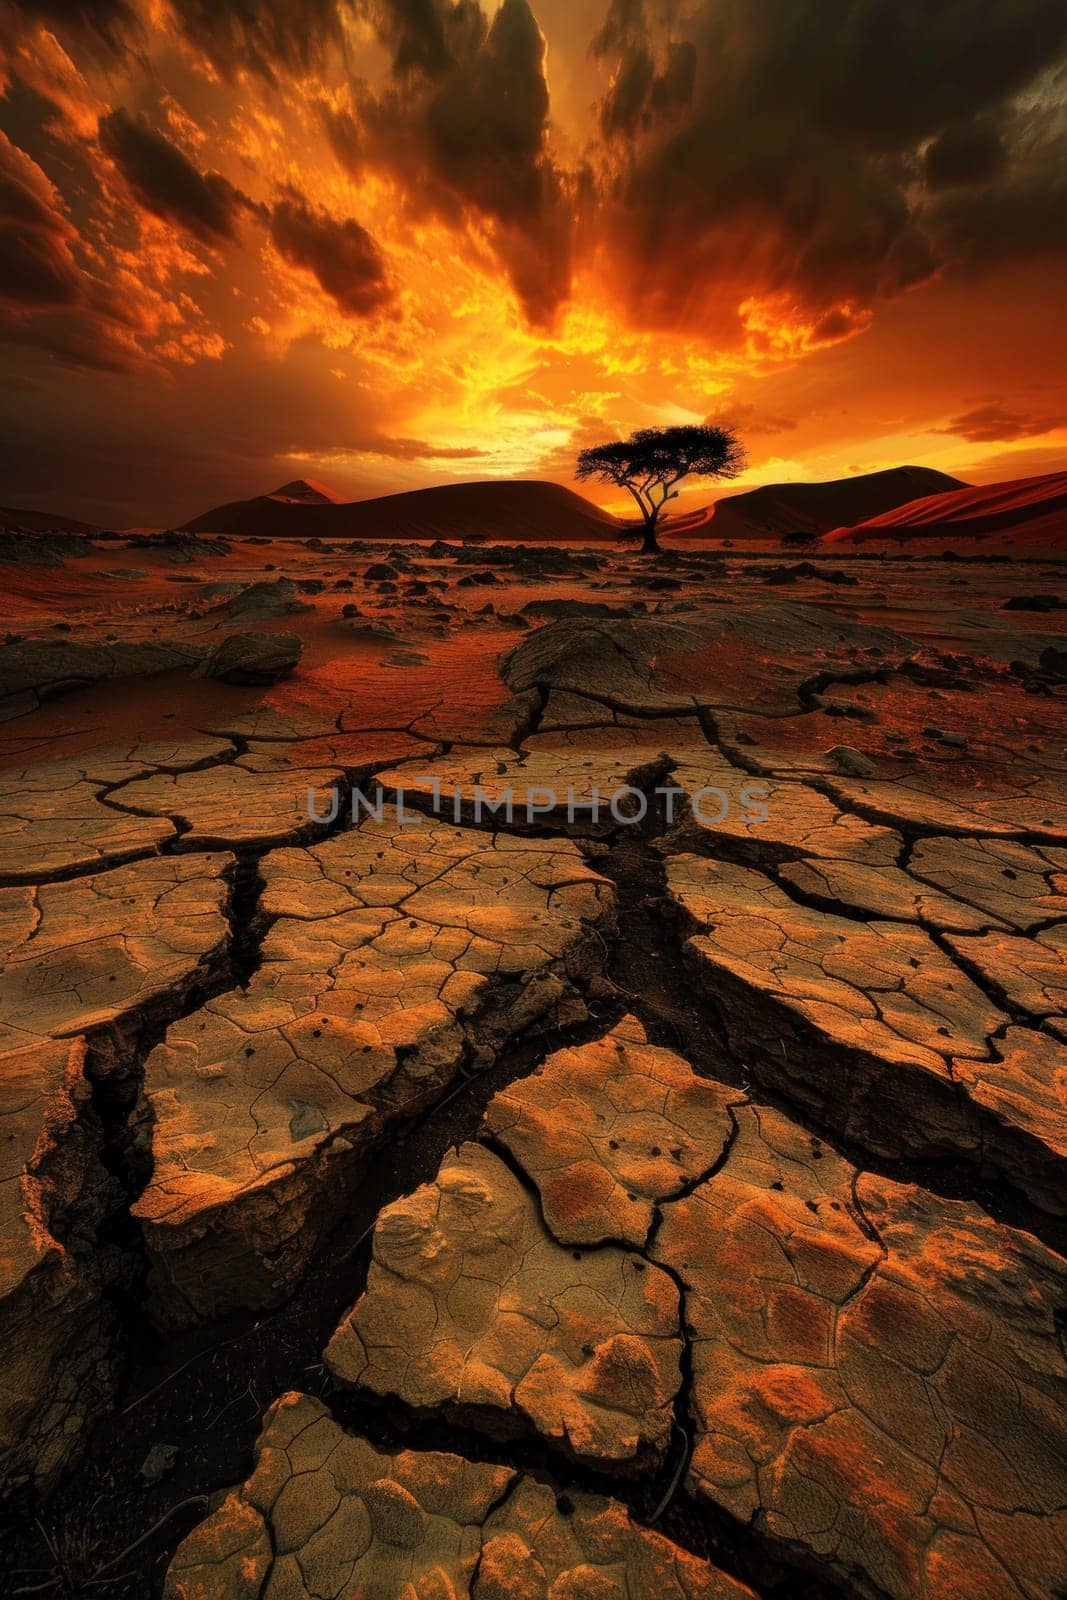 Lone tree standing in dramatic sunset landscape in the desert with cracked ground and travel adventure theme by Vichizh